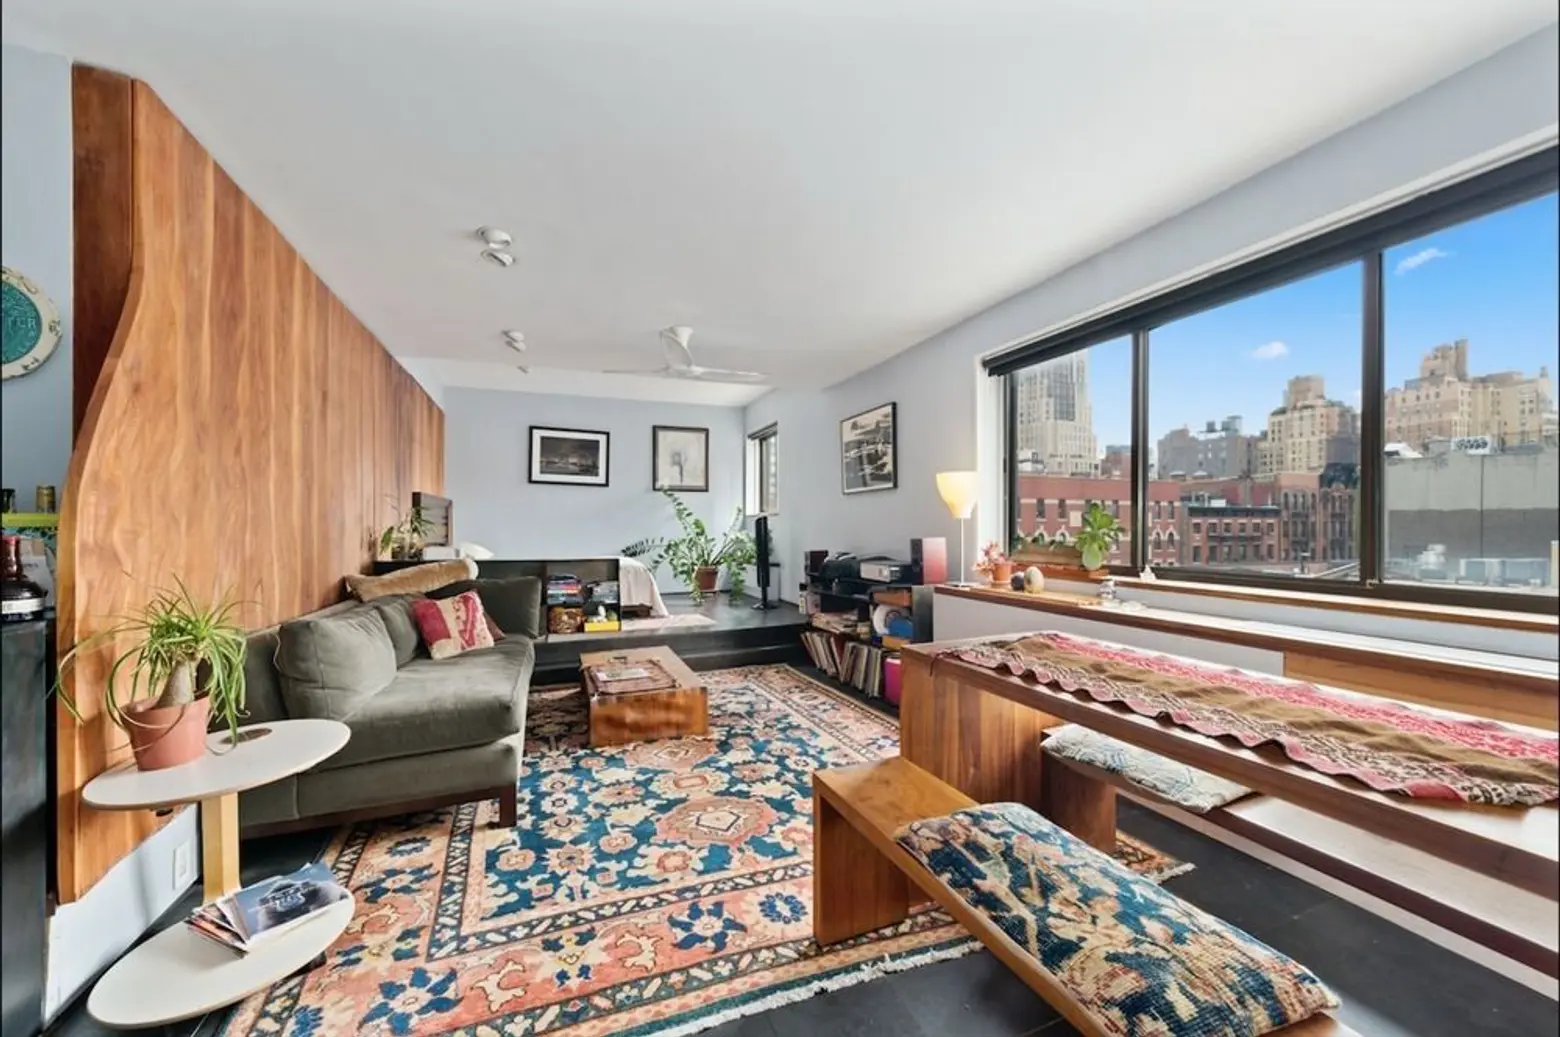 This little Chelsea studio with cool custom details and a stunning wood wall is asking $589K